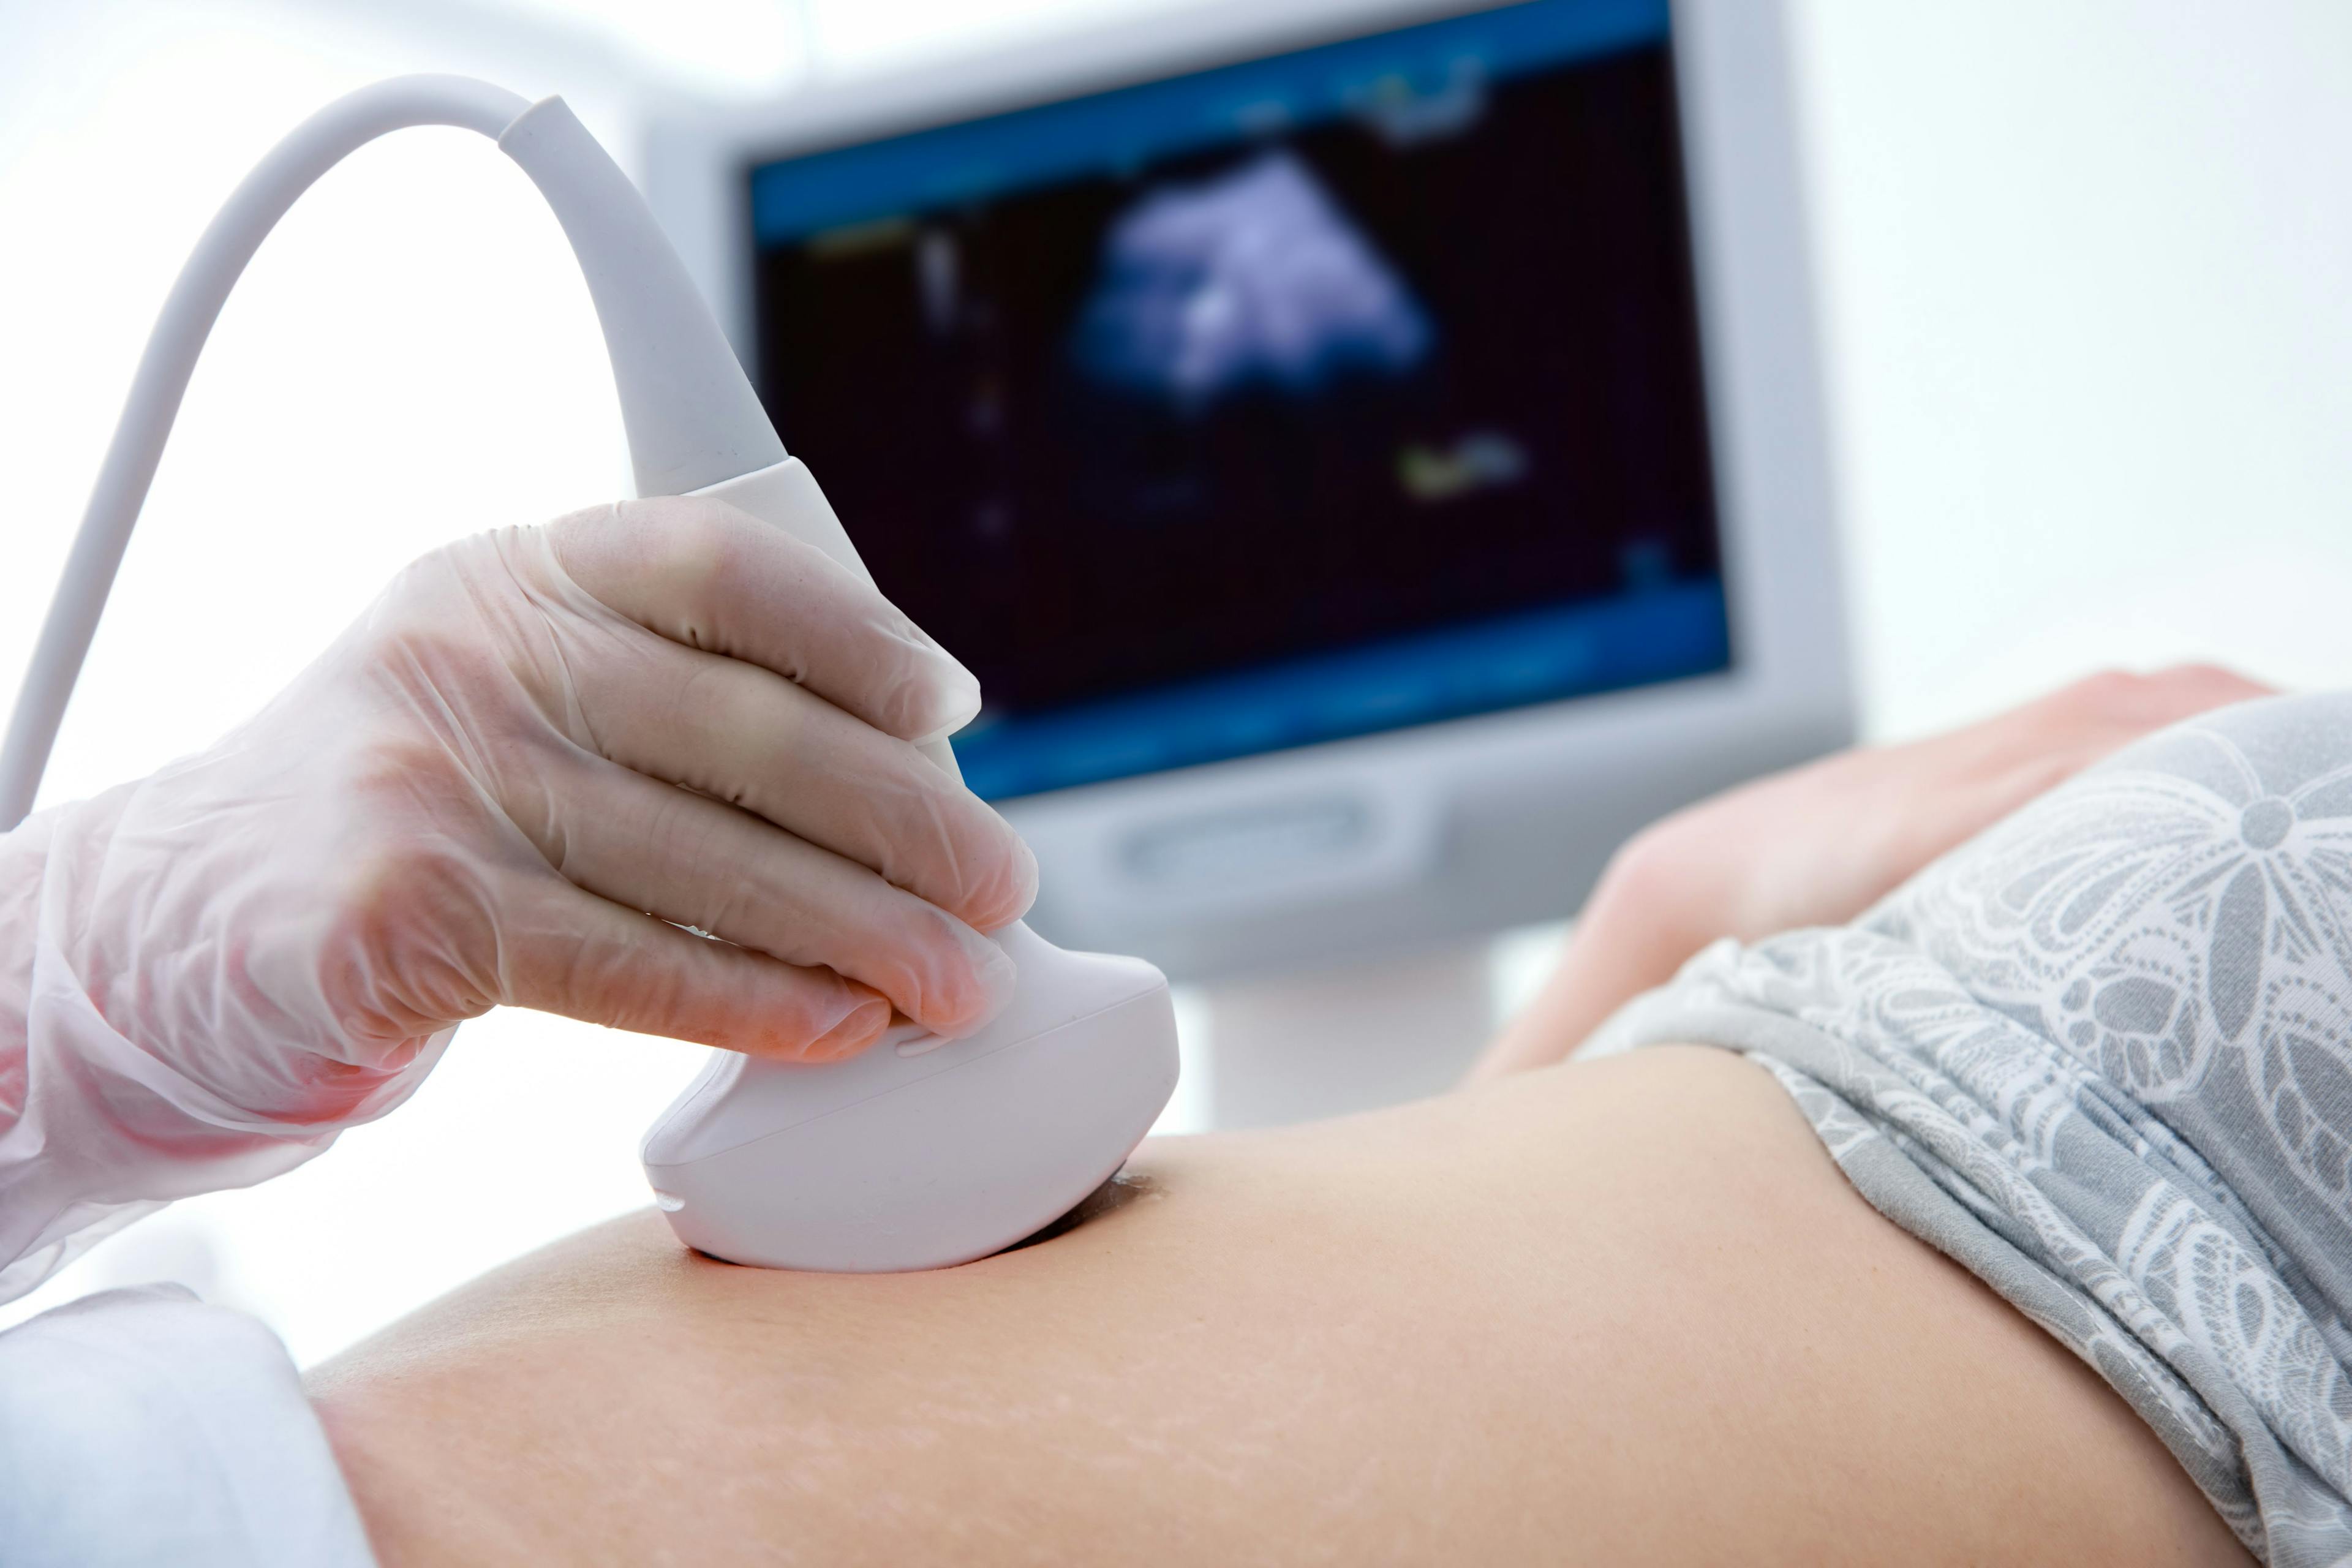 Sonographic abnormalities in pregnancies after IVF